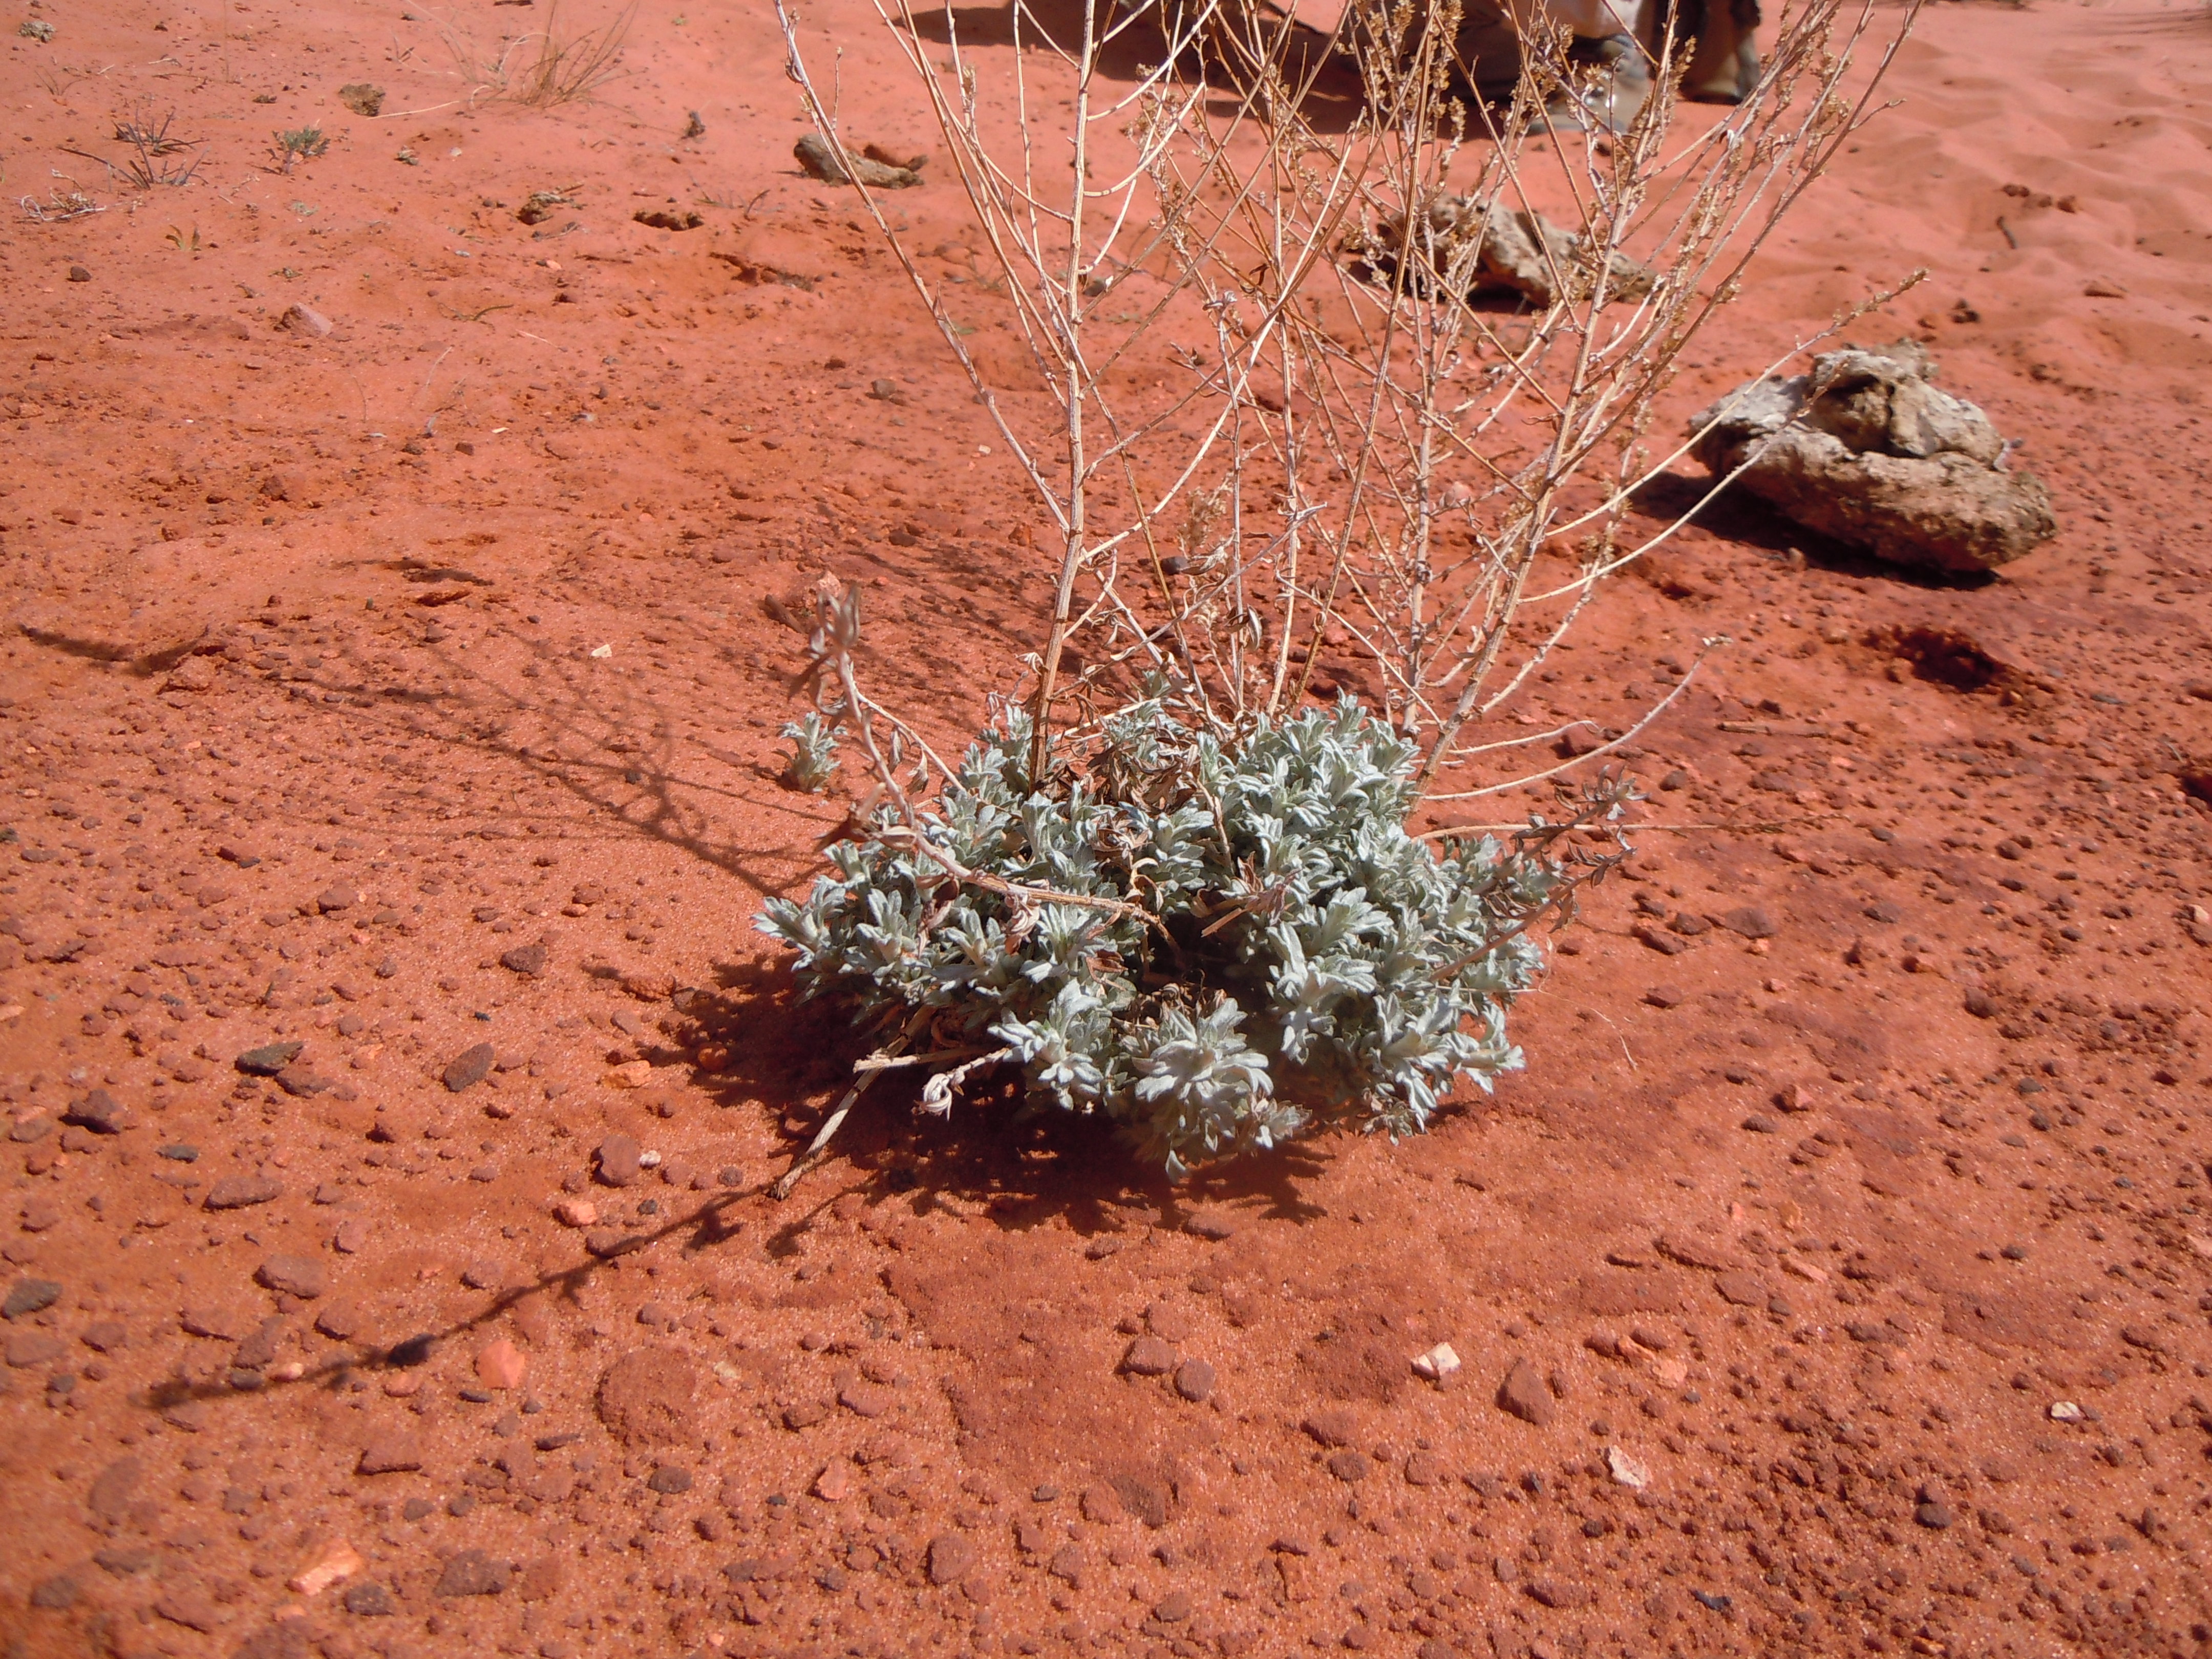 Growth habit of entire plant showing low shrubbiness